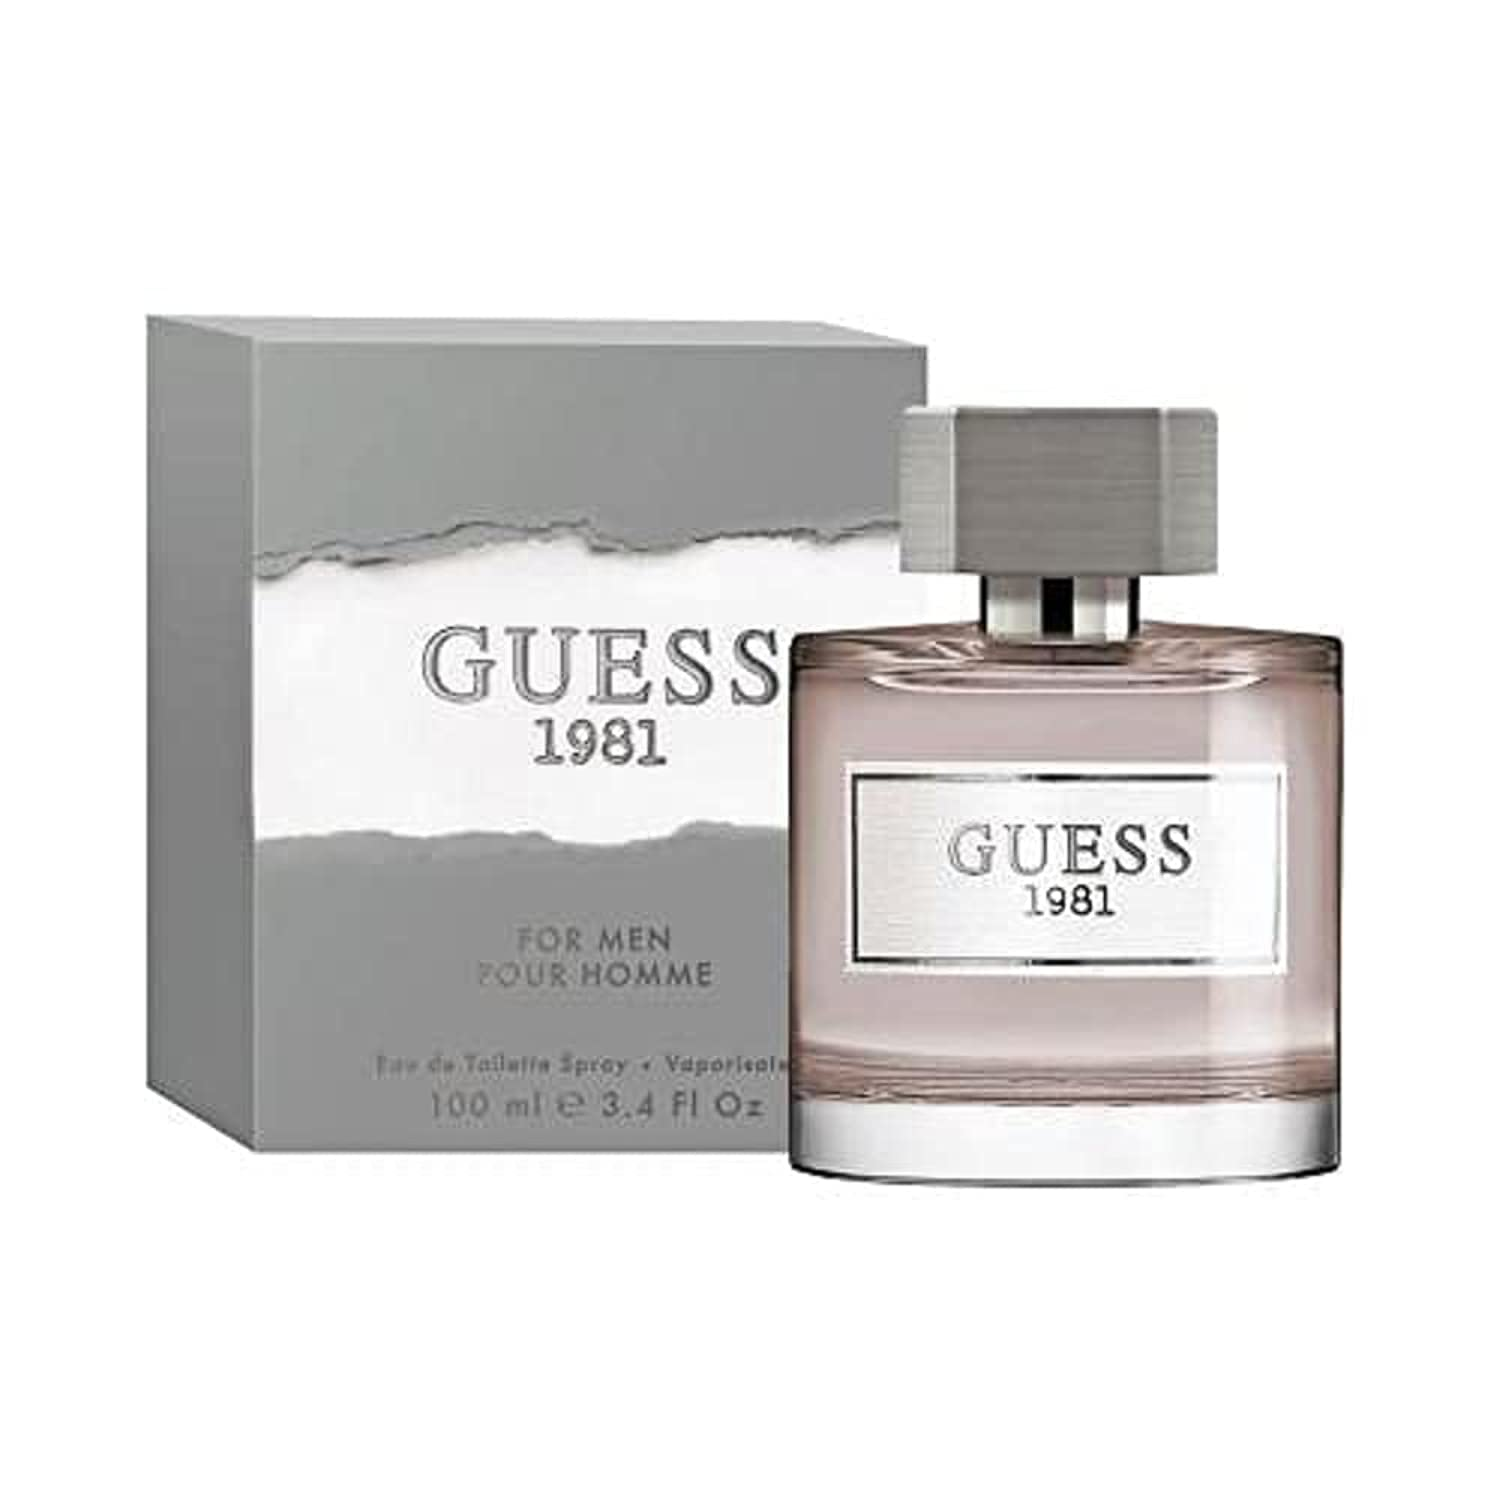 4) 1981 - Guess